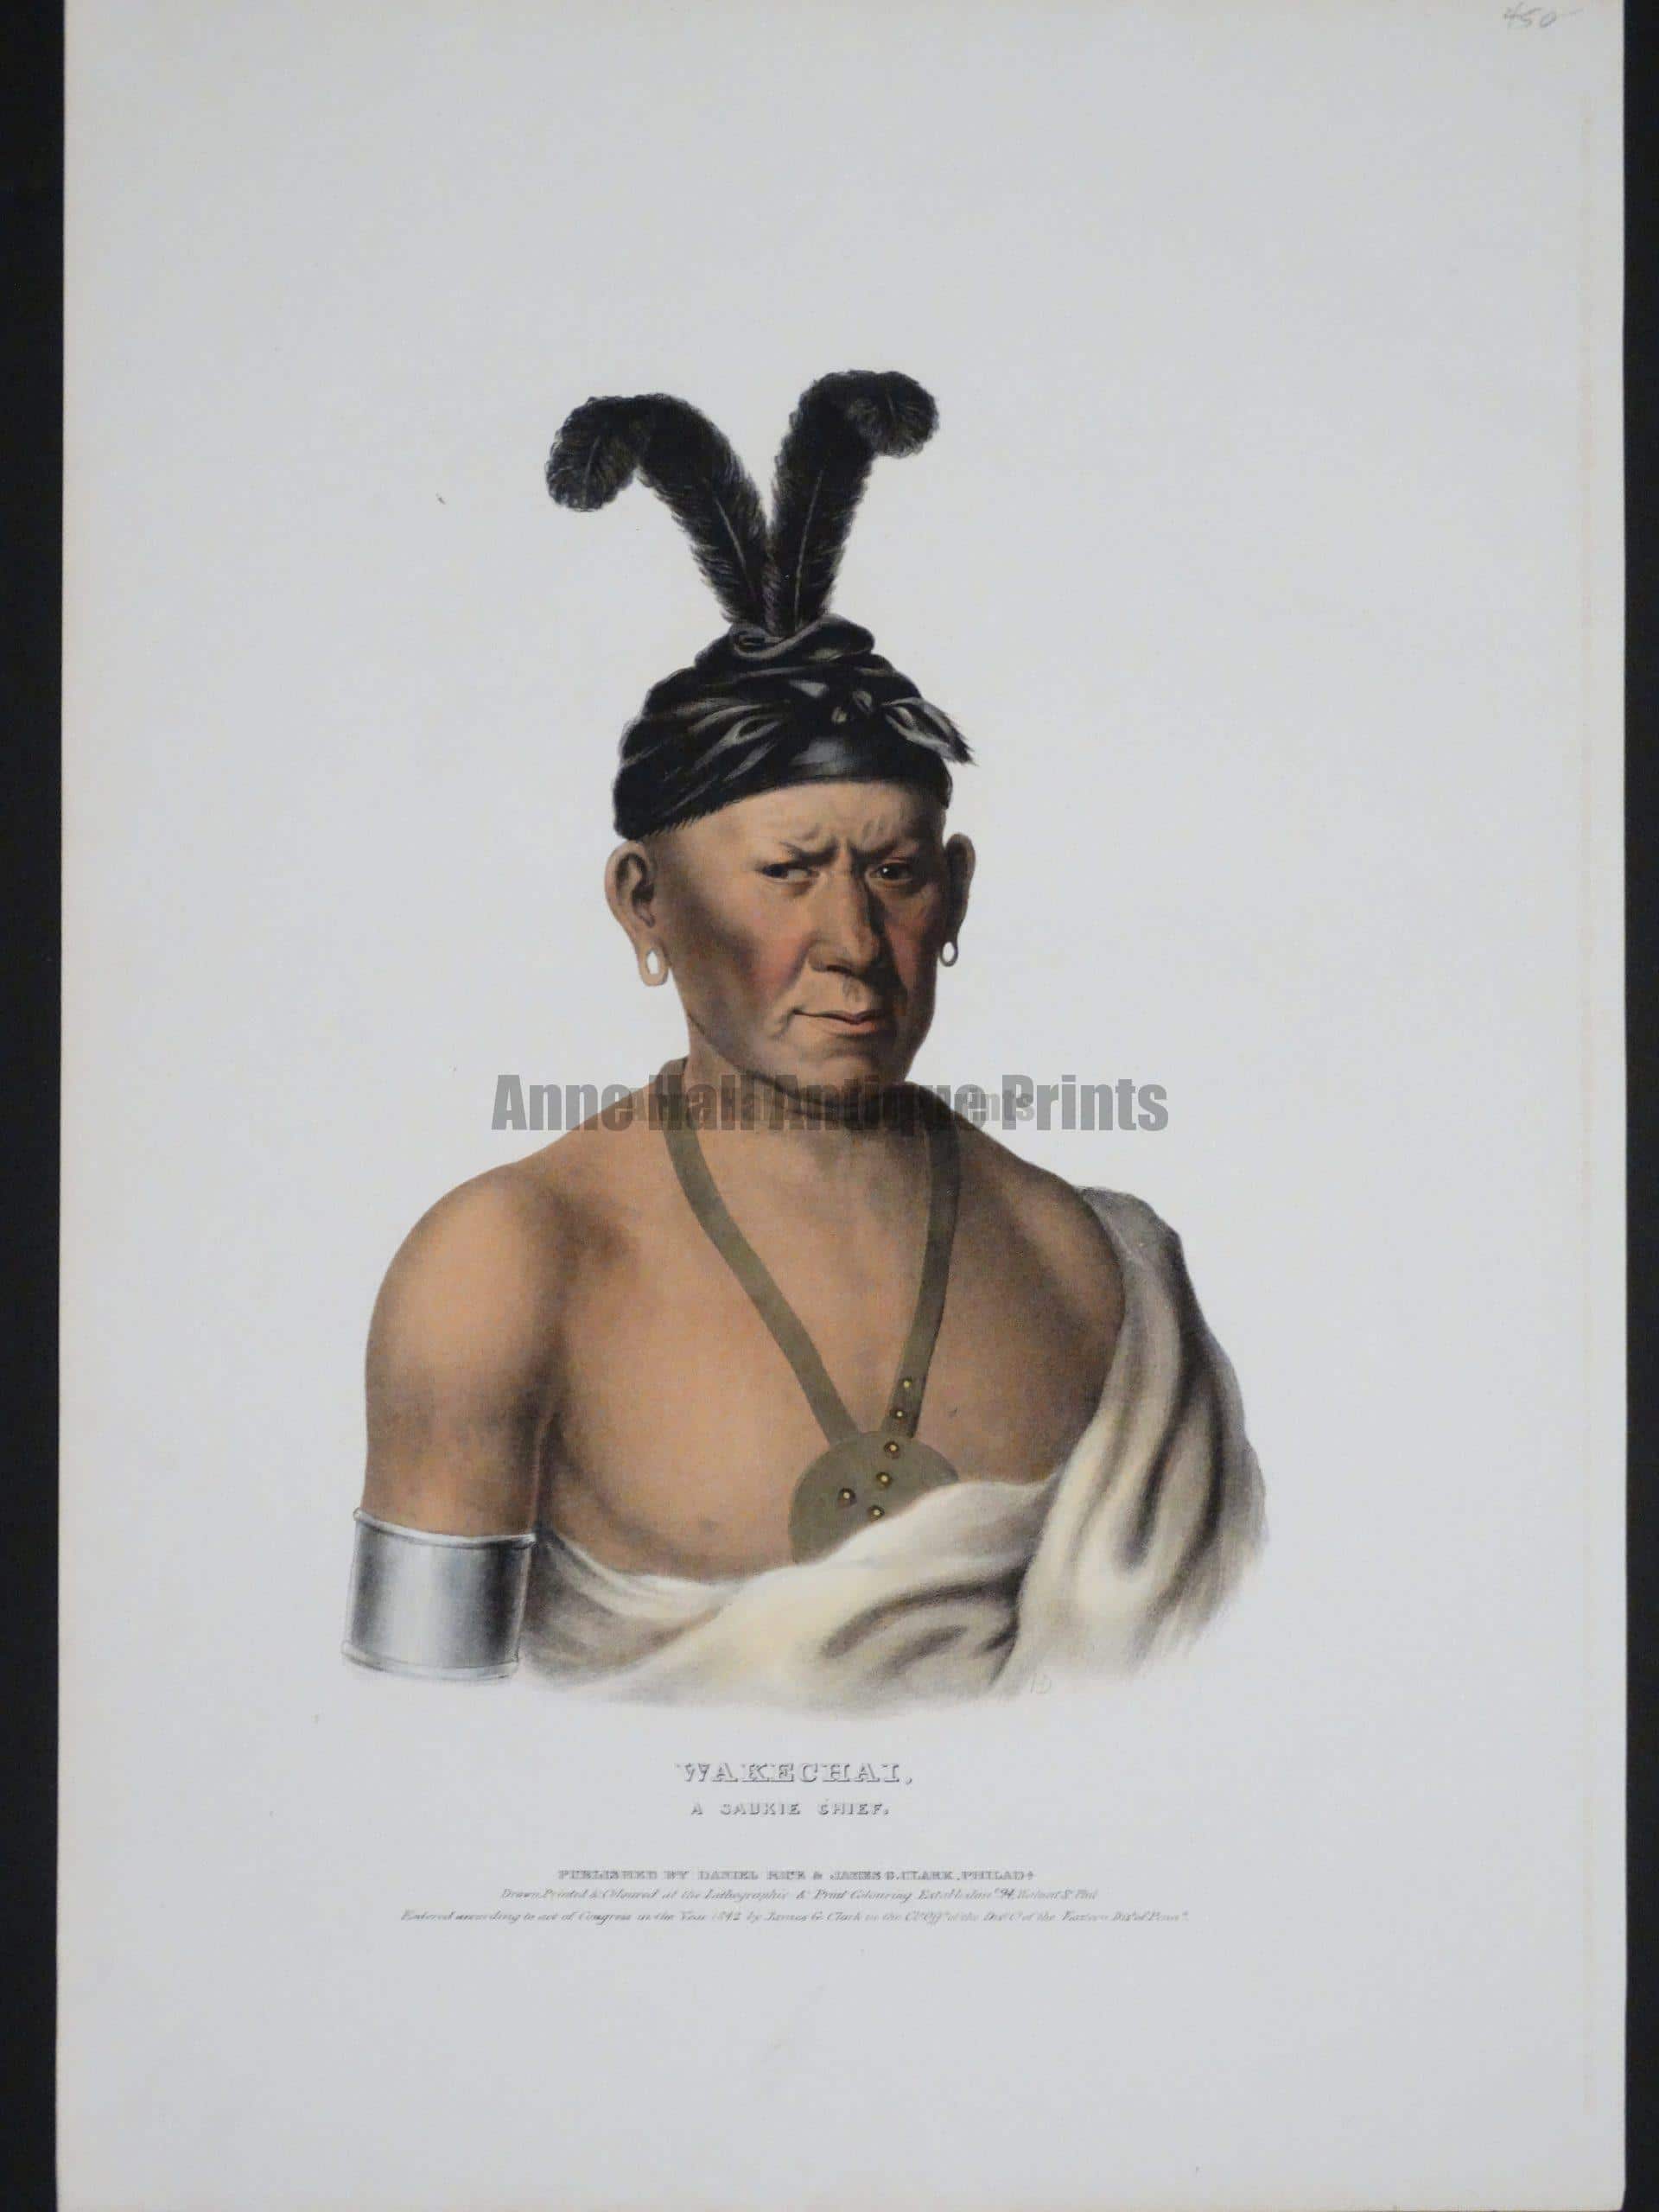 McKenney Hall - Wakechai, large 1830's lithograph, the art is of Saukie Chief, 2 feathers up & medal.